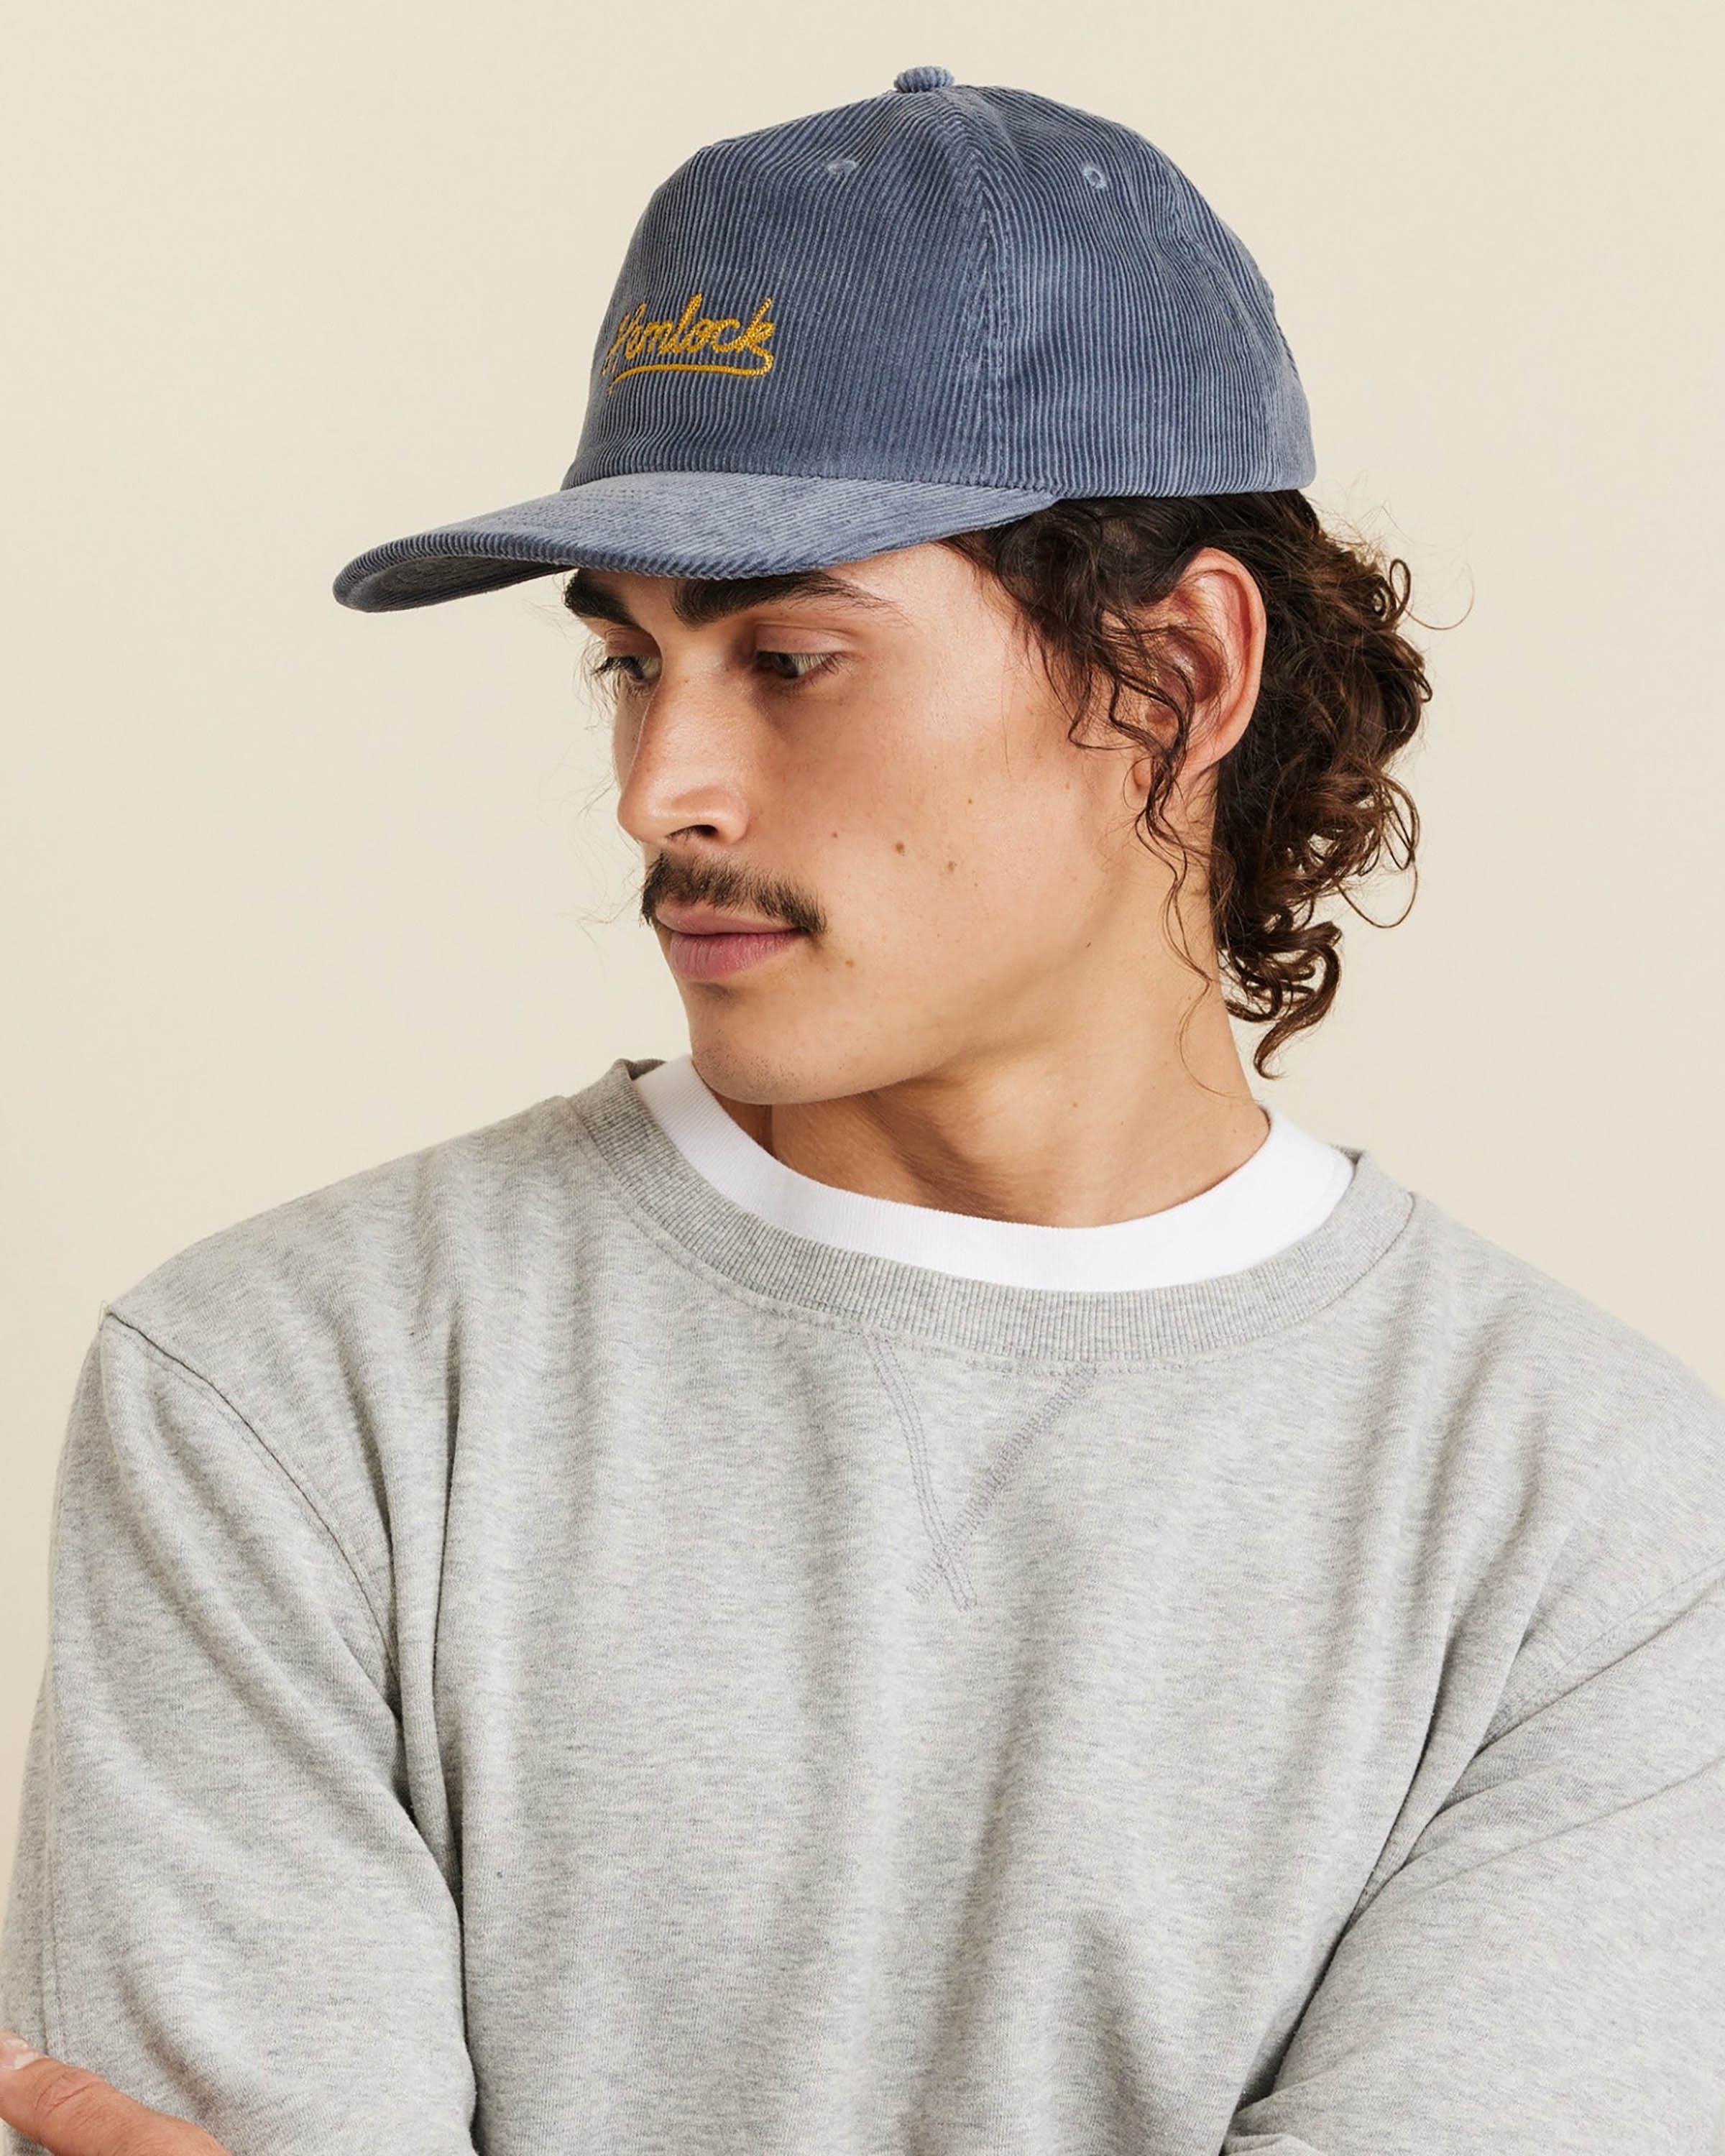 BF Hemlock hat - Corduroy structured 5 panel snapback for embroidery or  screen print at Black Fish Clothing